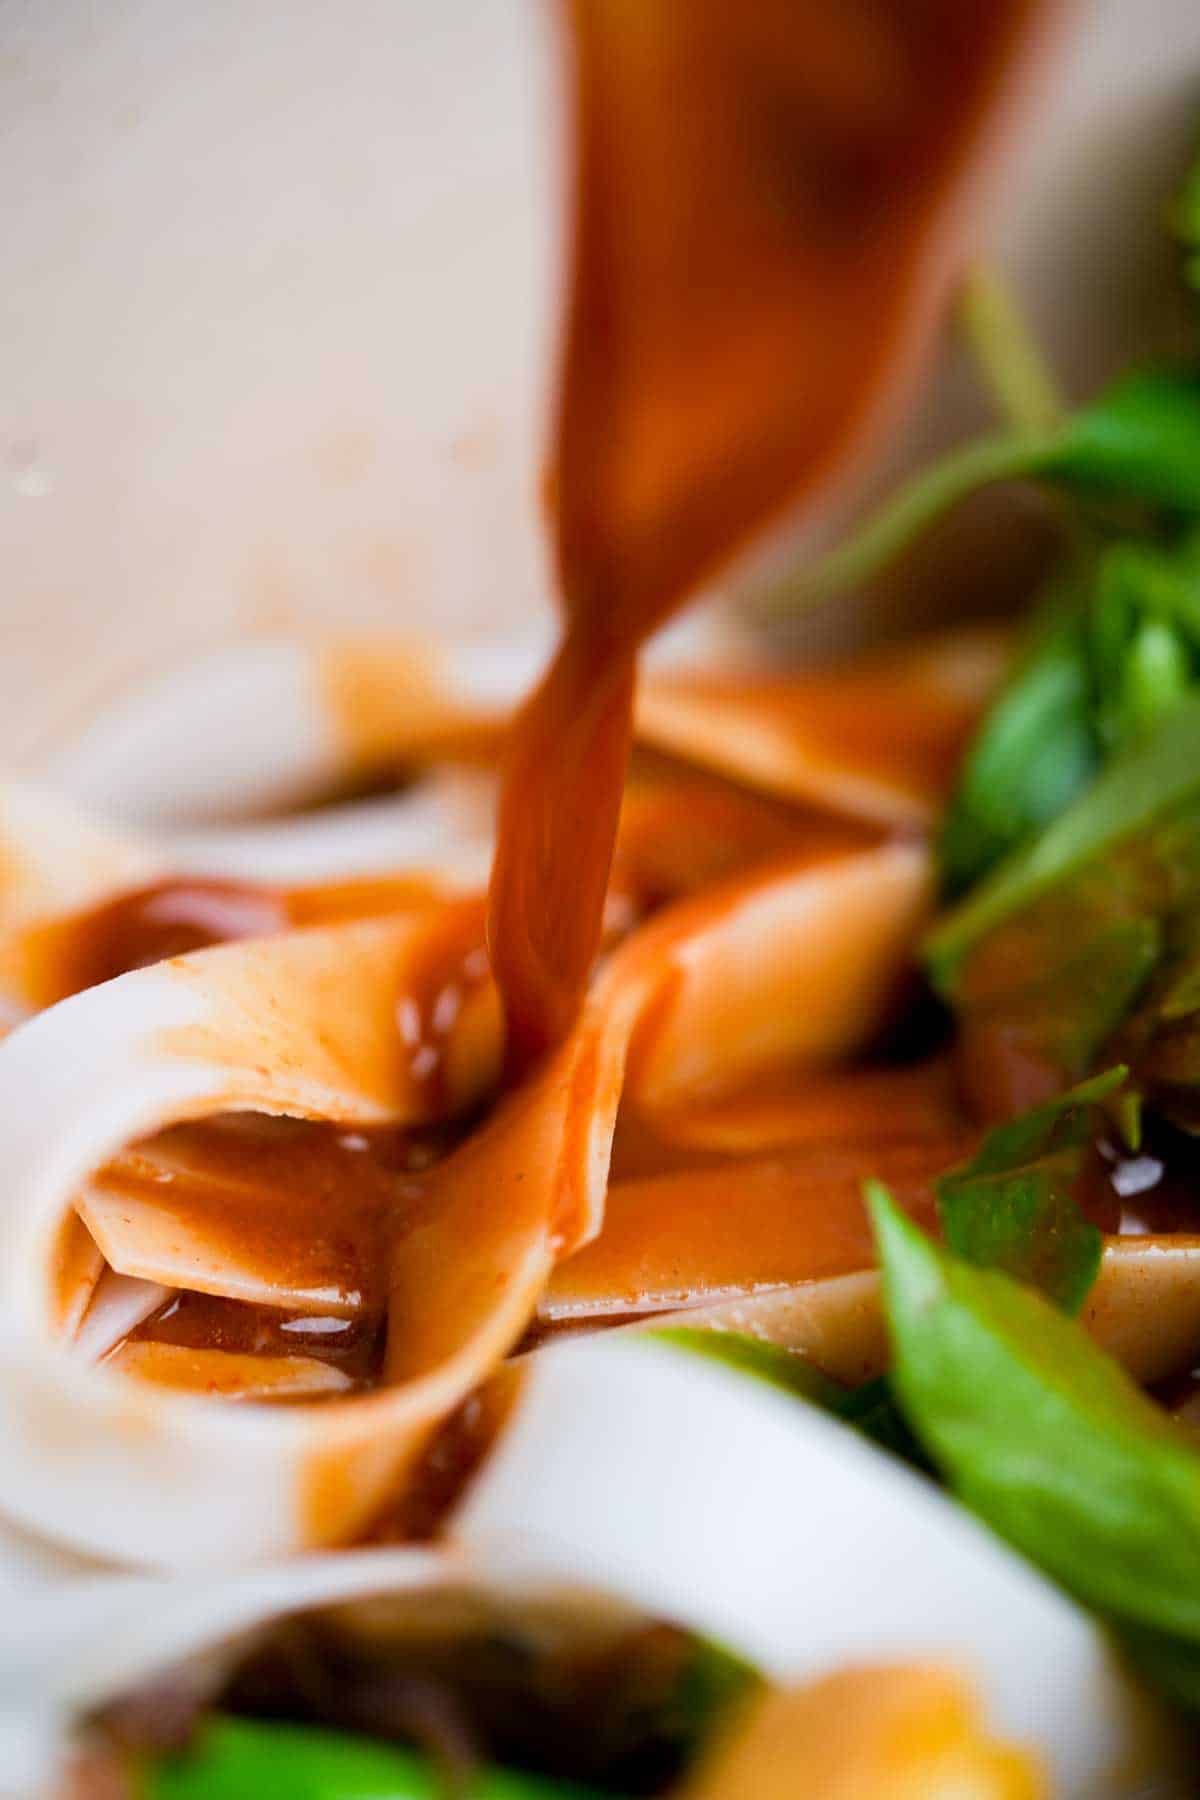 A sauce being poured over noodles and greens.